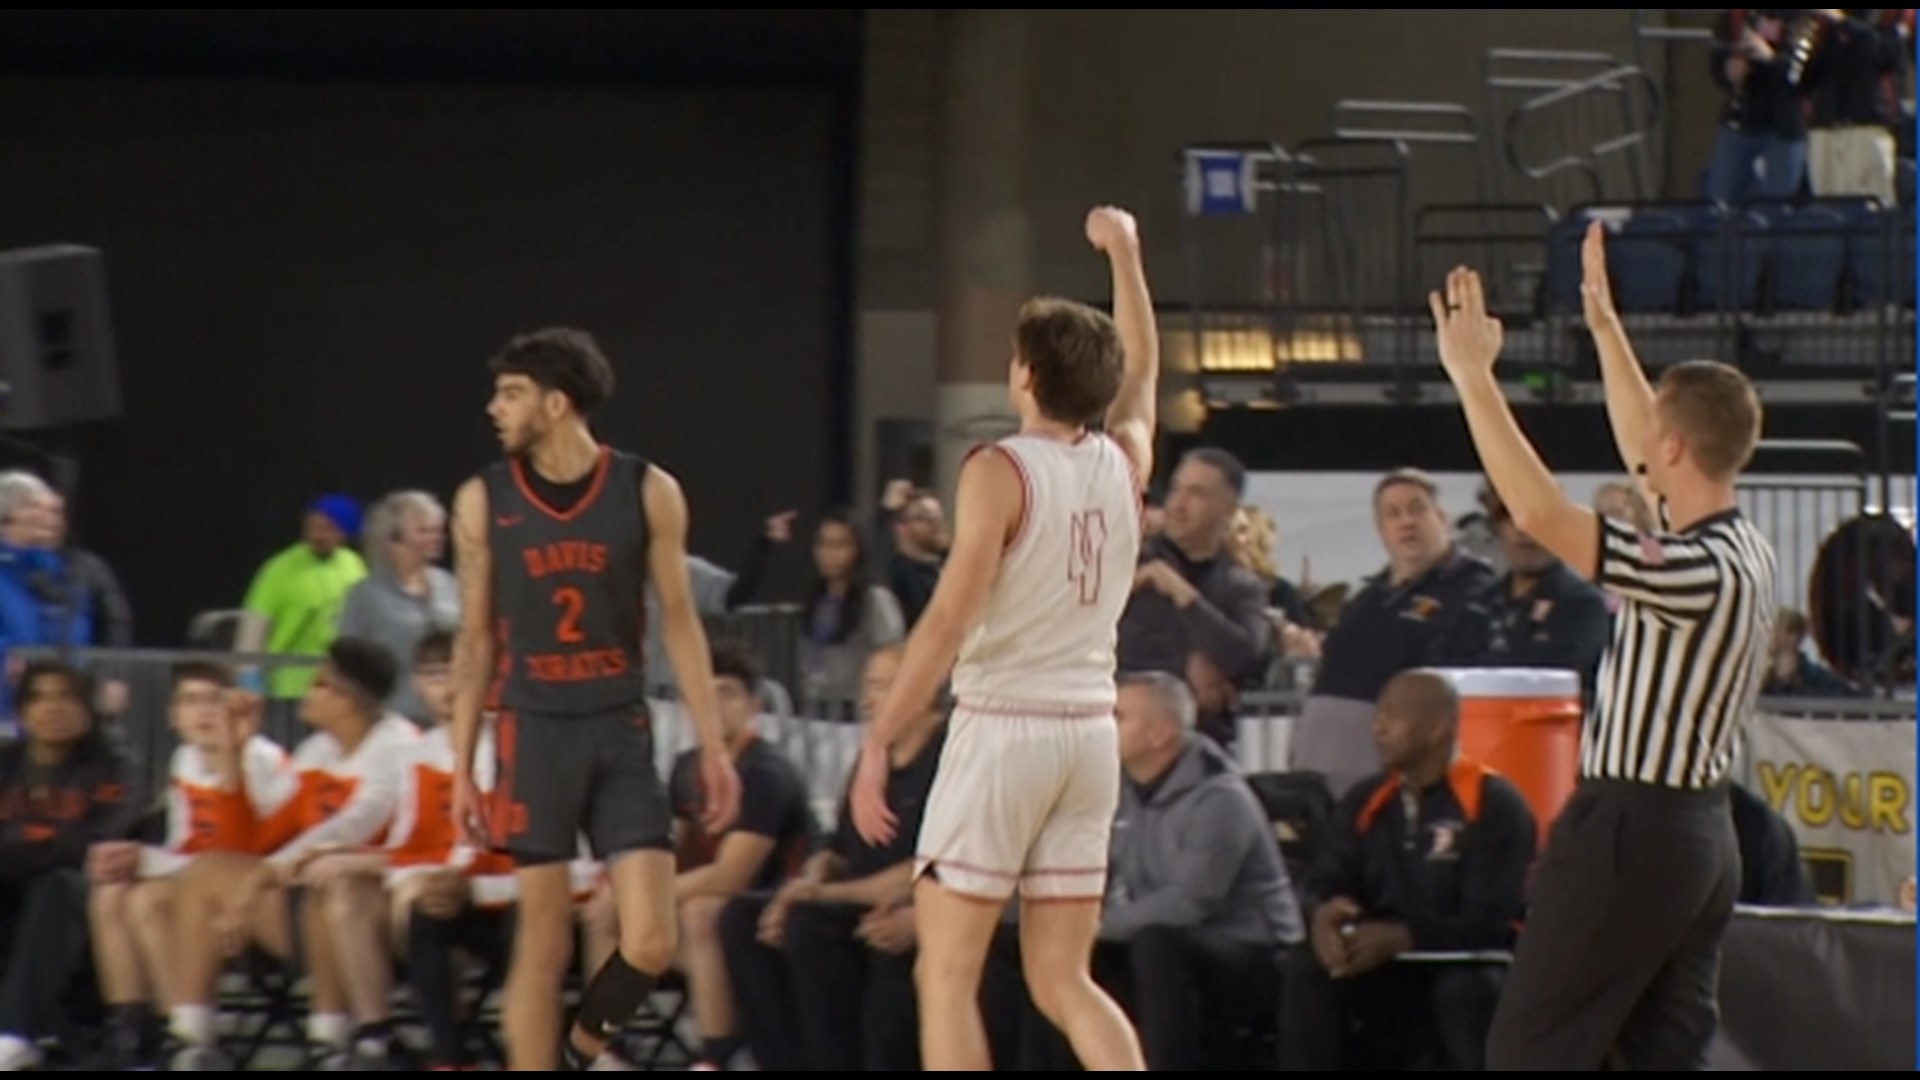 Highlights of the Mount Si boys 57-45 win over Davis in the 4A State Semifinals